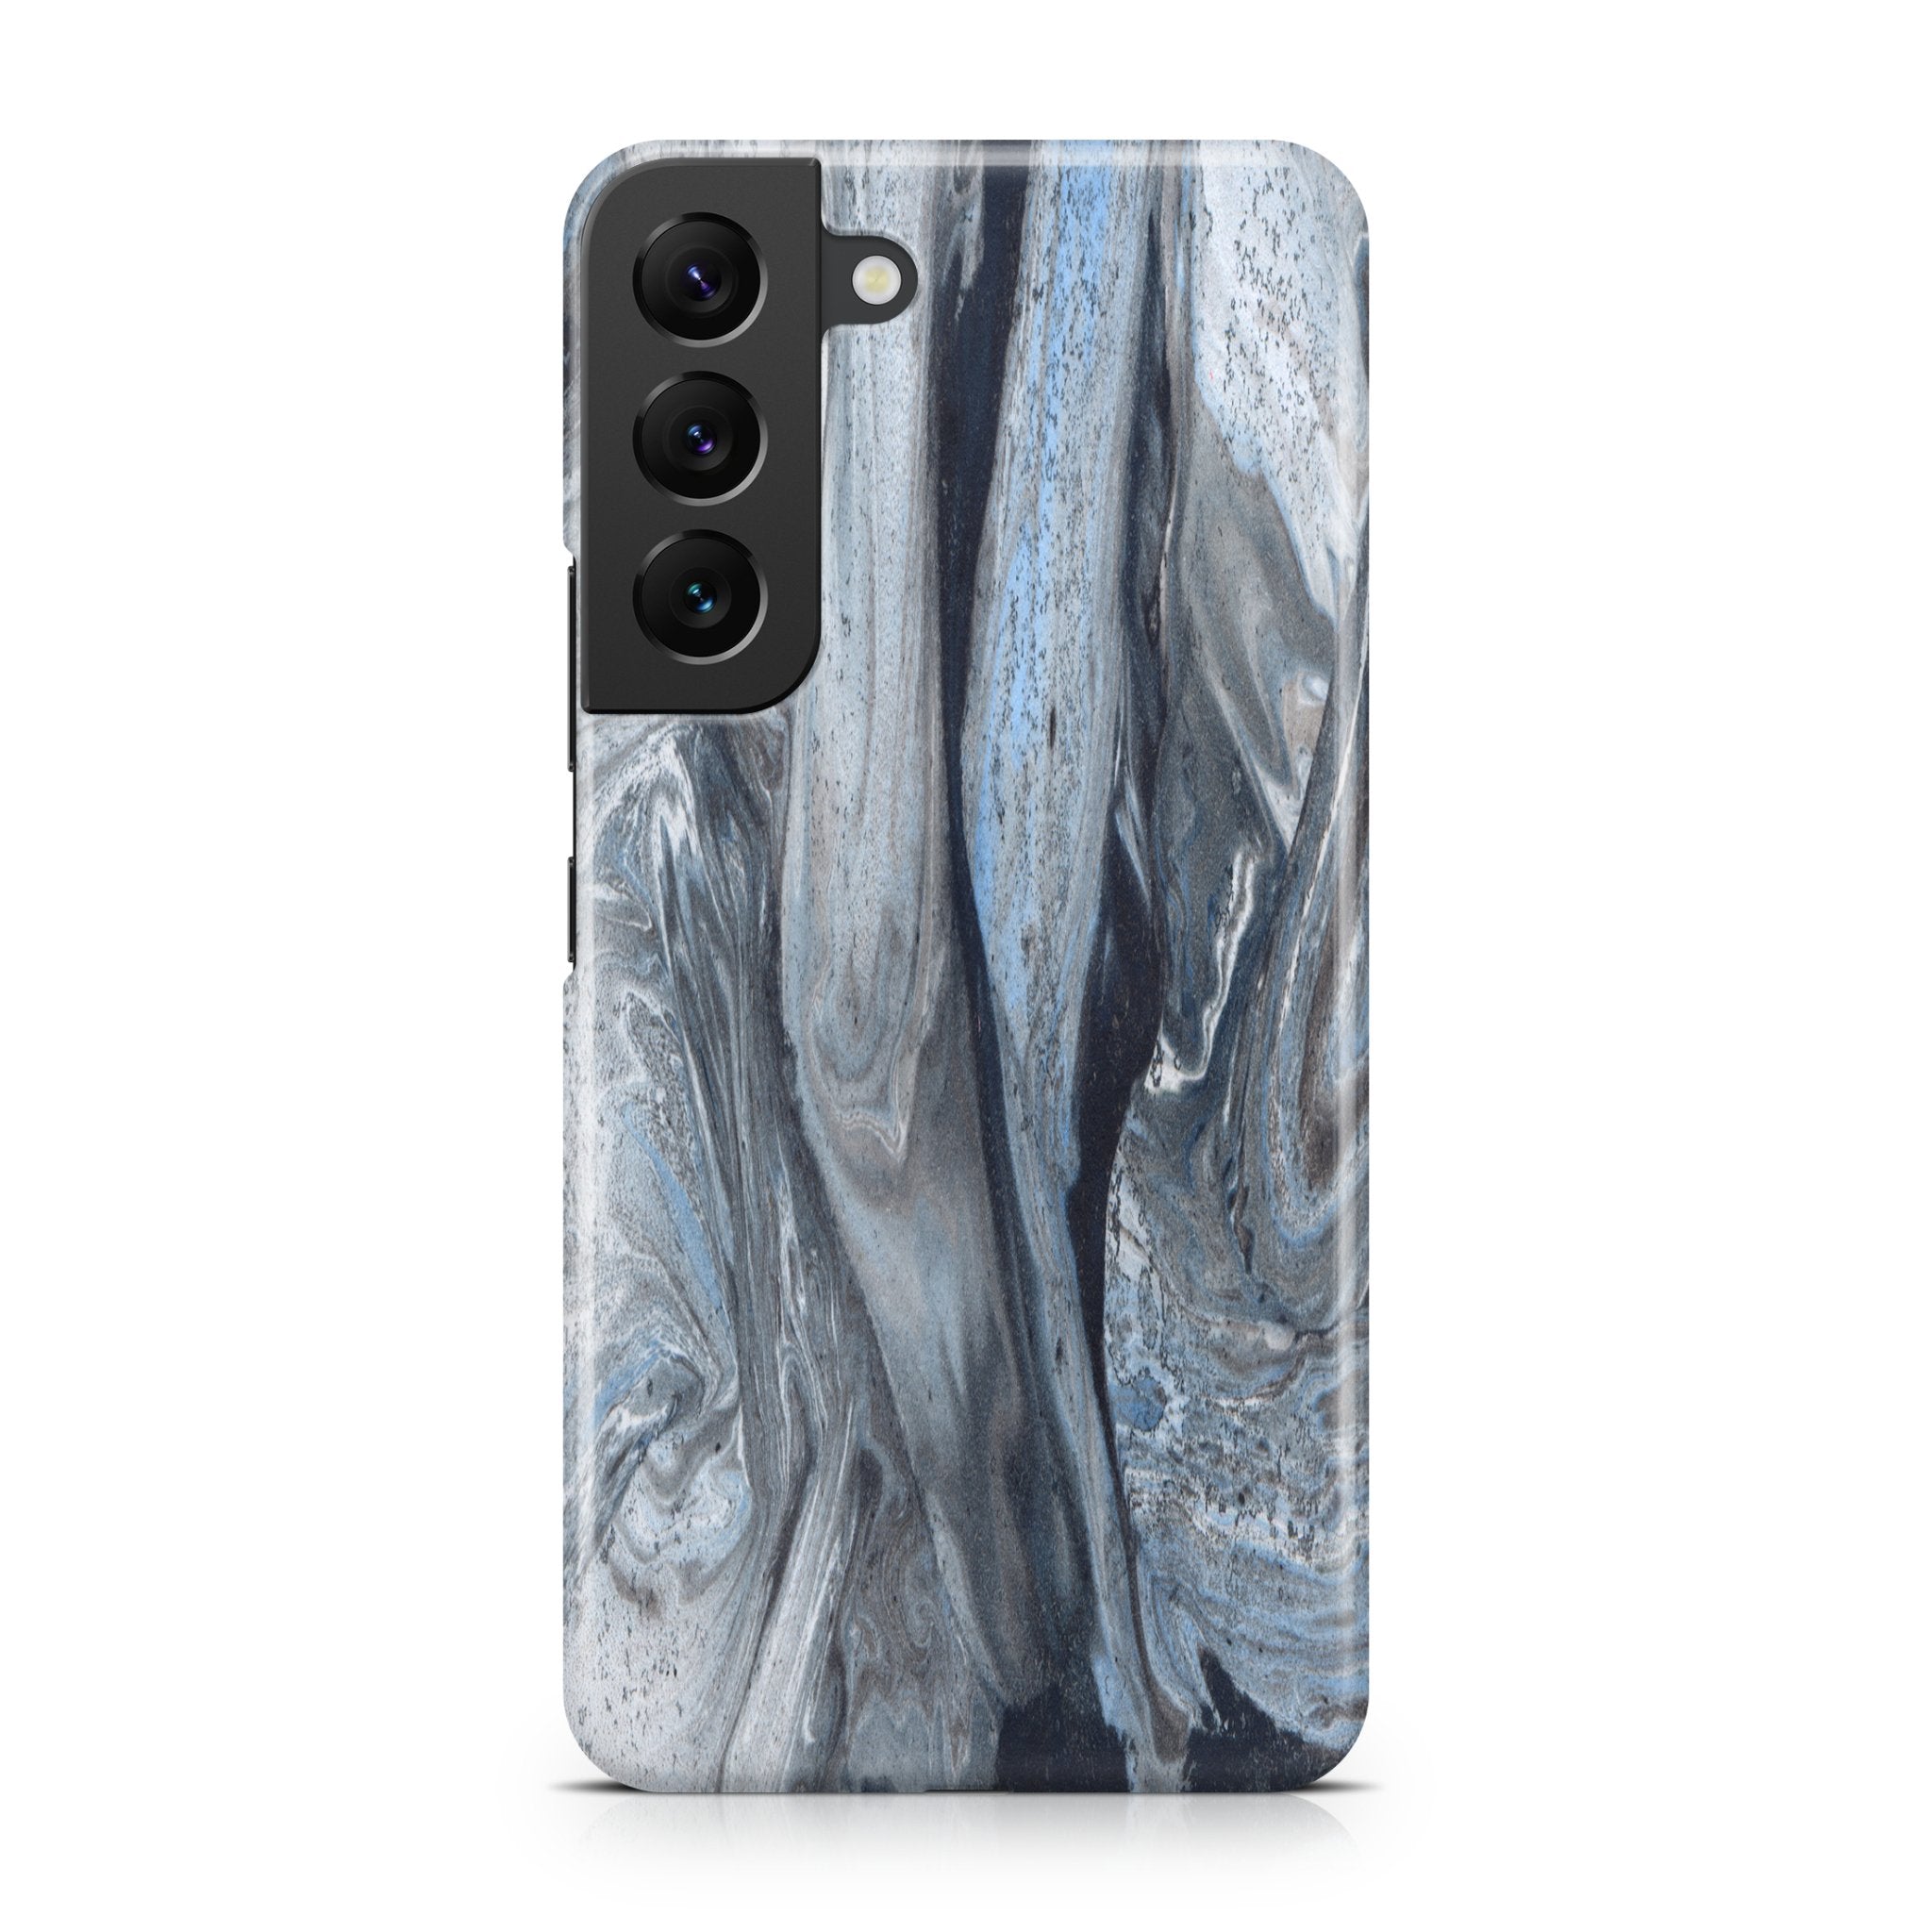 Black & White Marble Series II - Samsung phone case designs by CaseSwagger